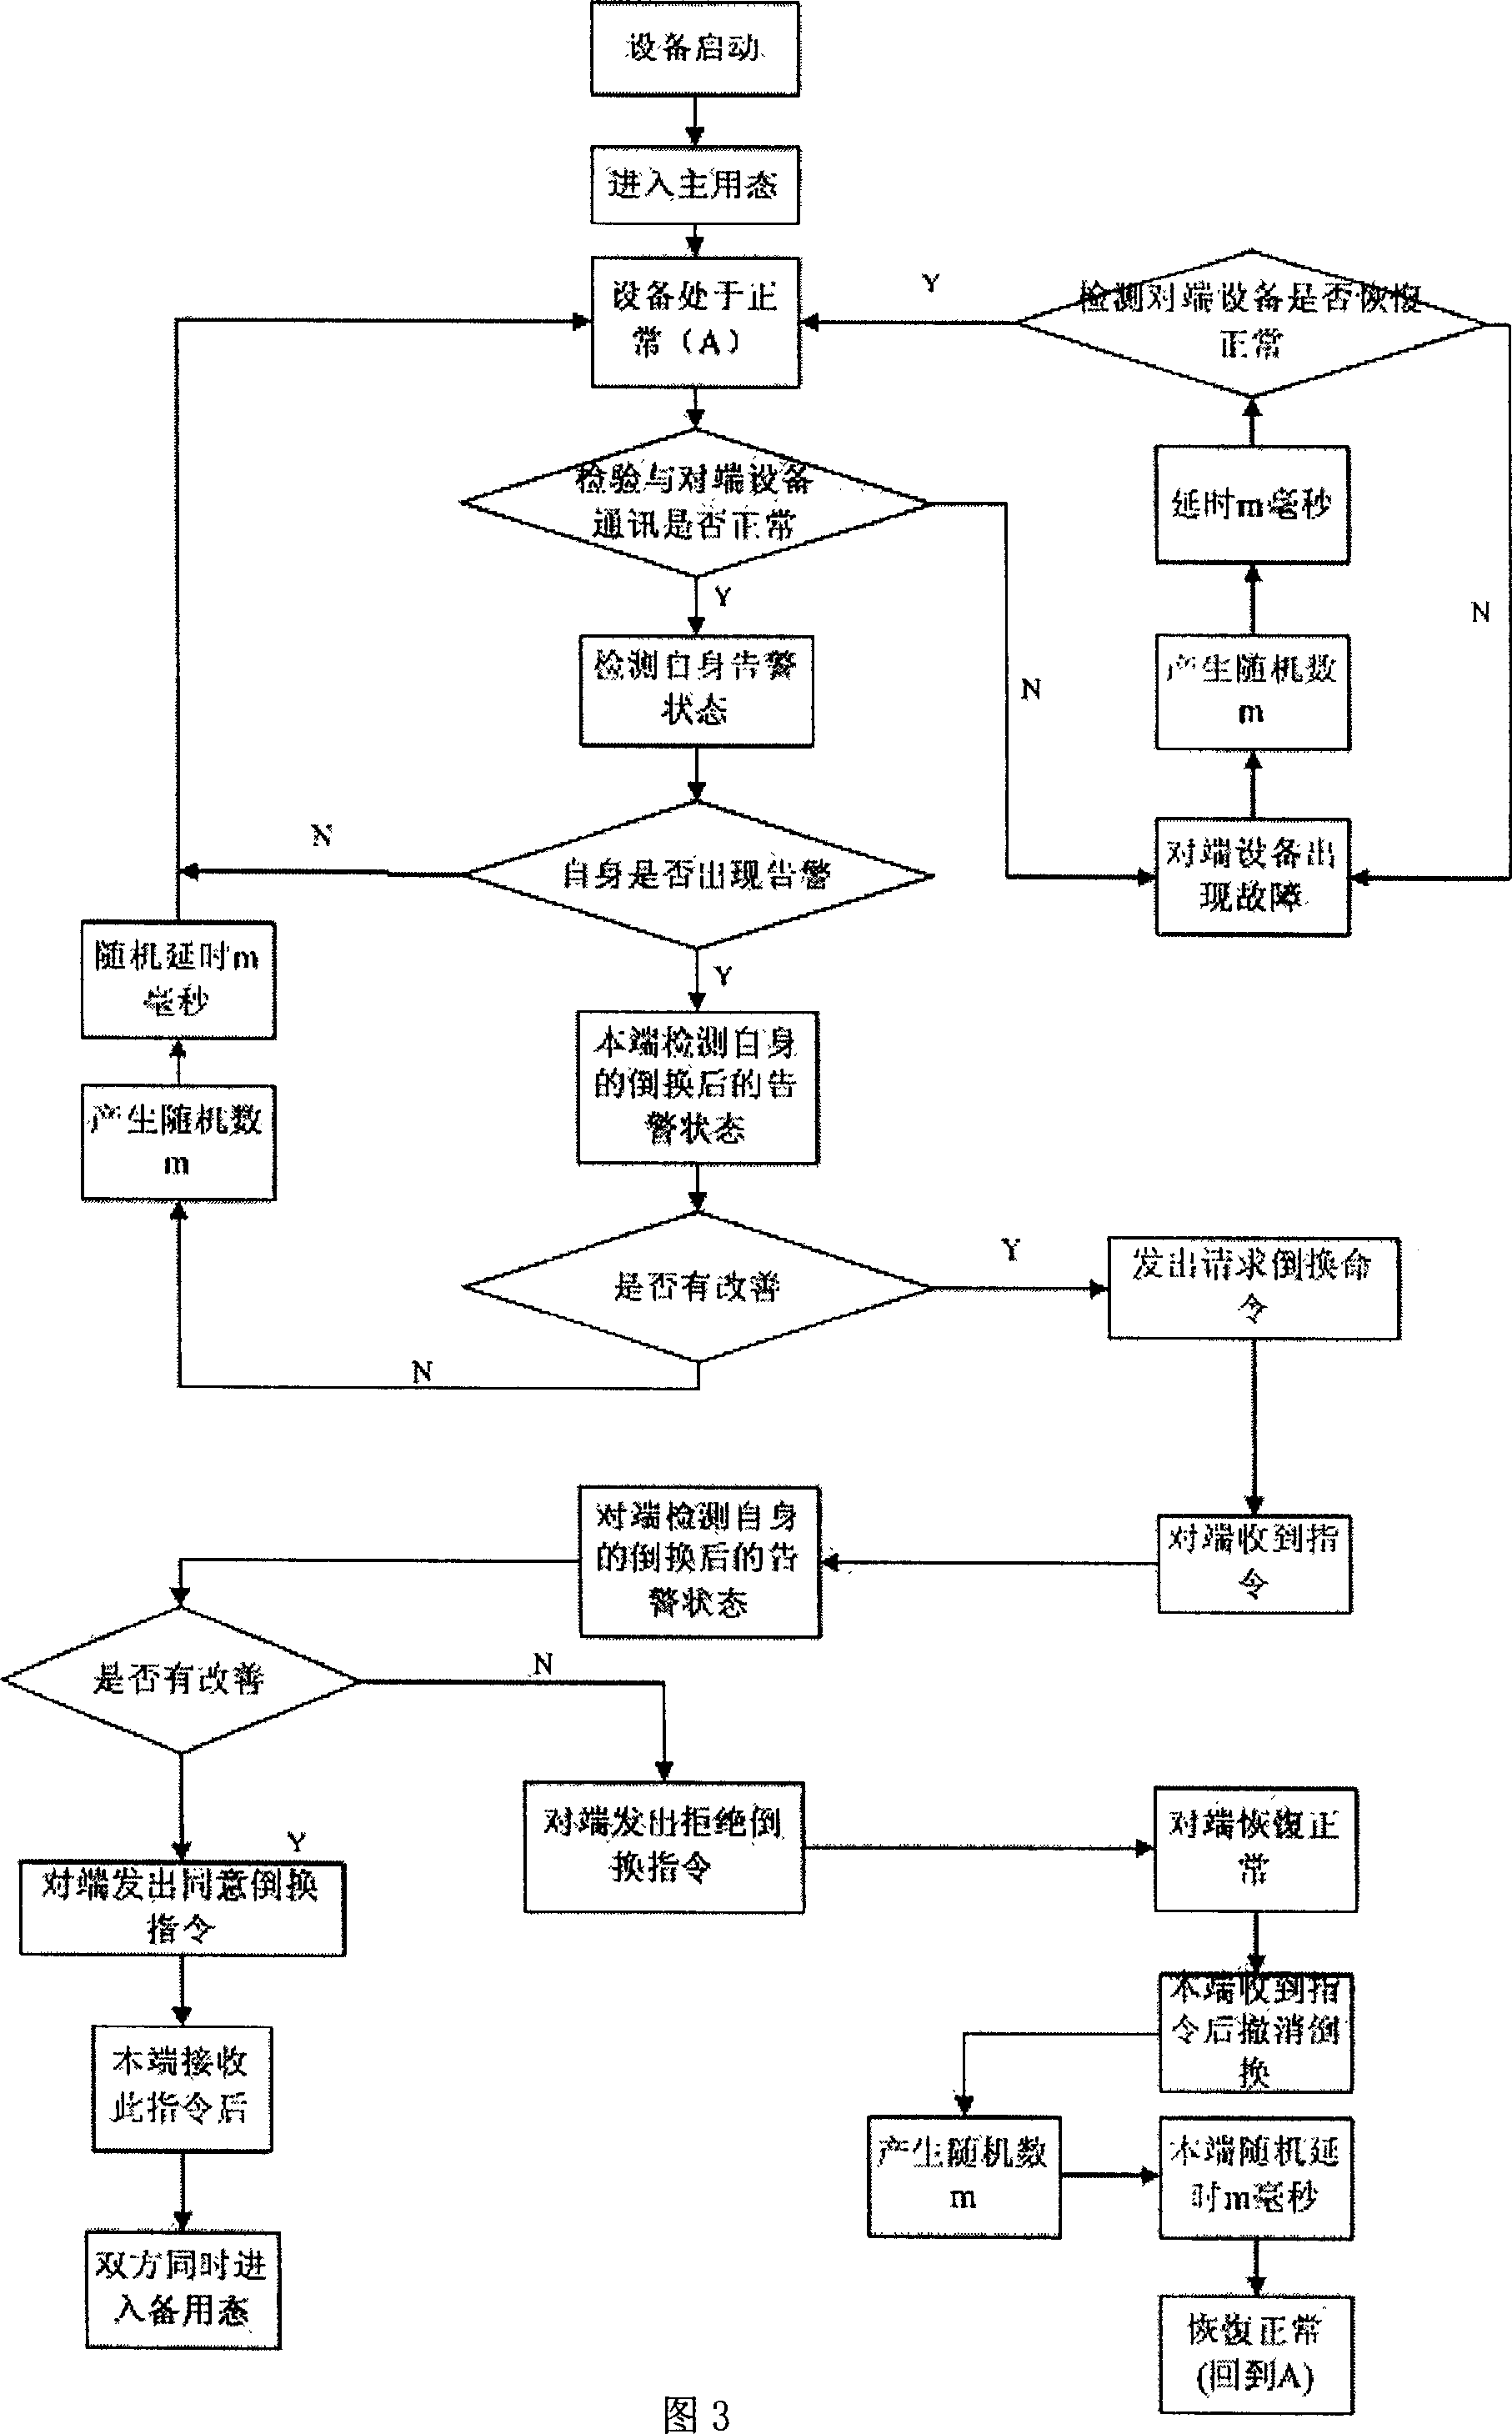 Master and slave converting method for communication link circuit